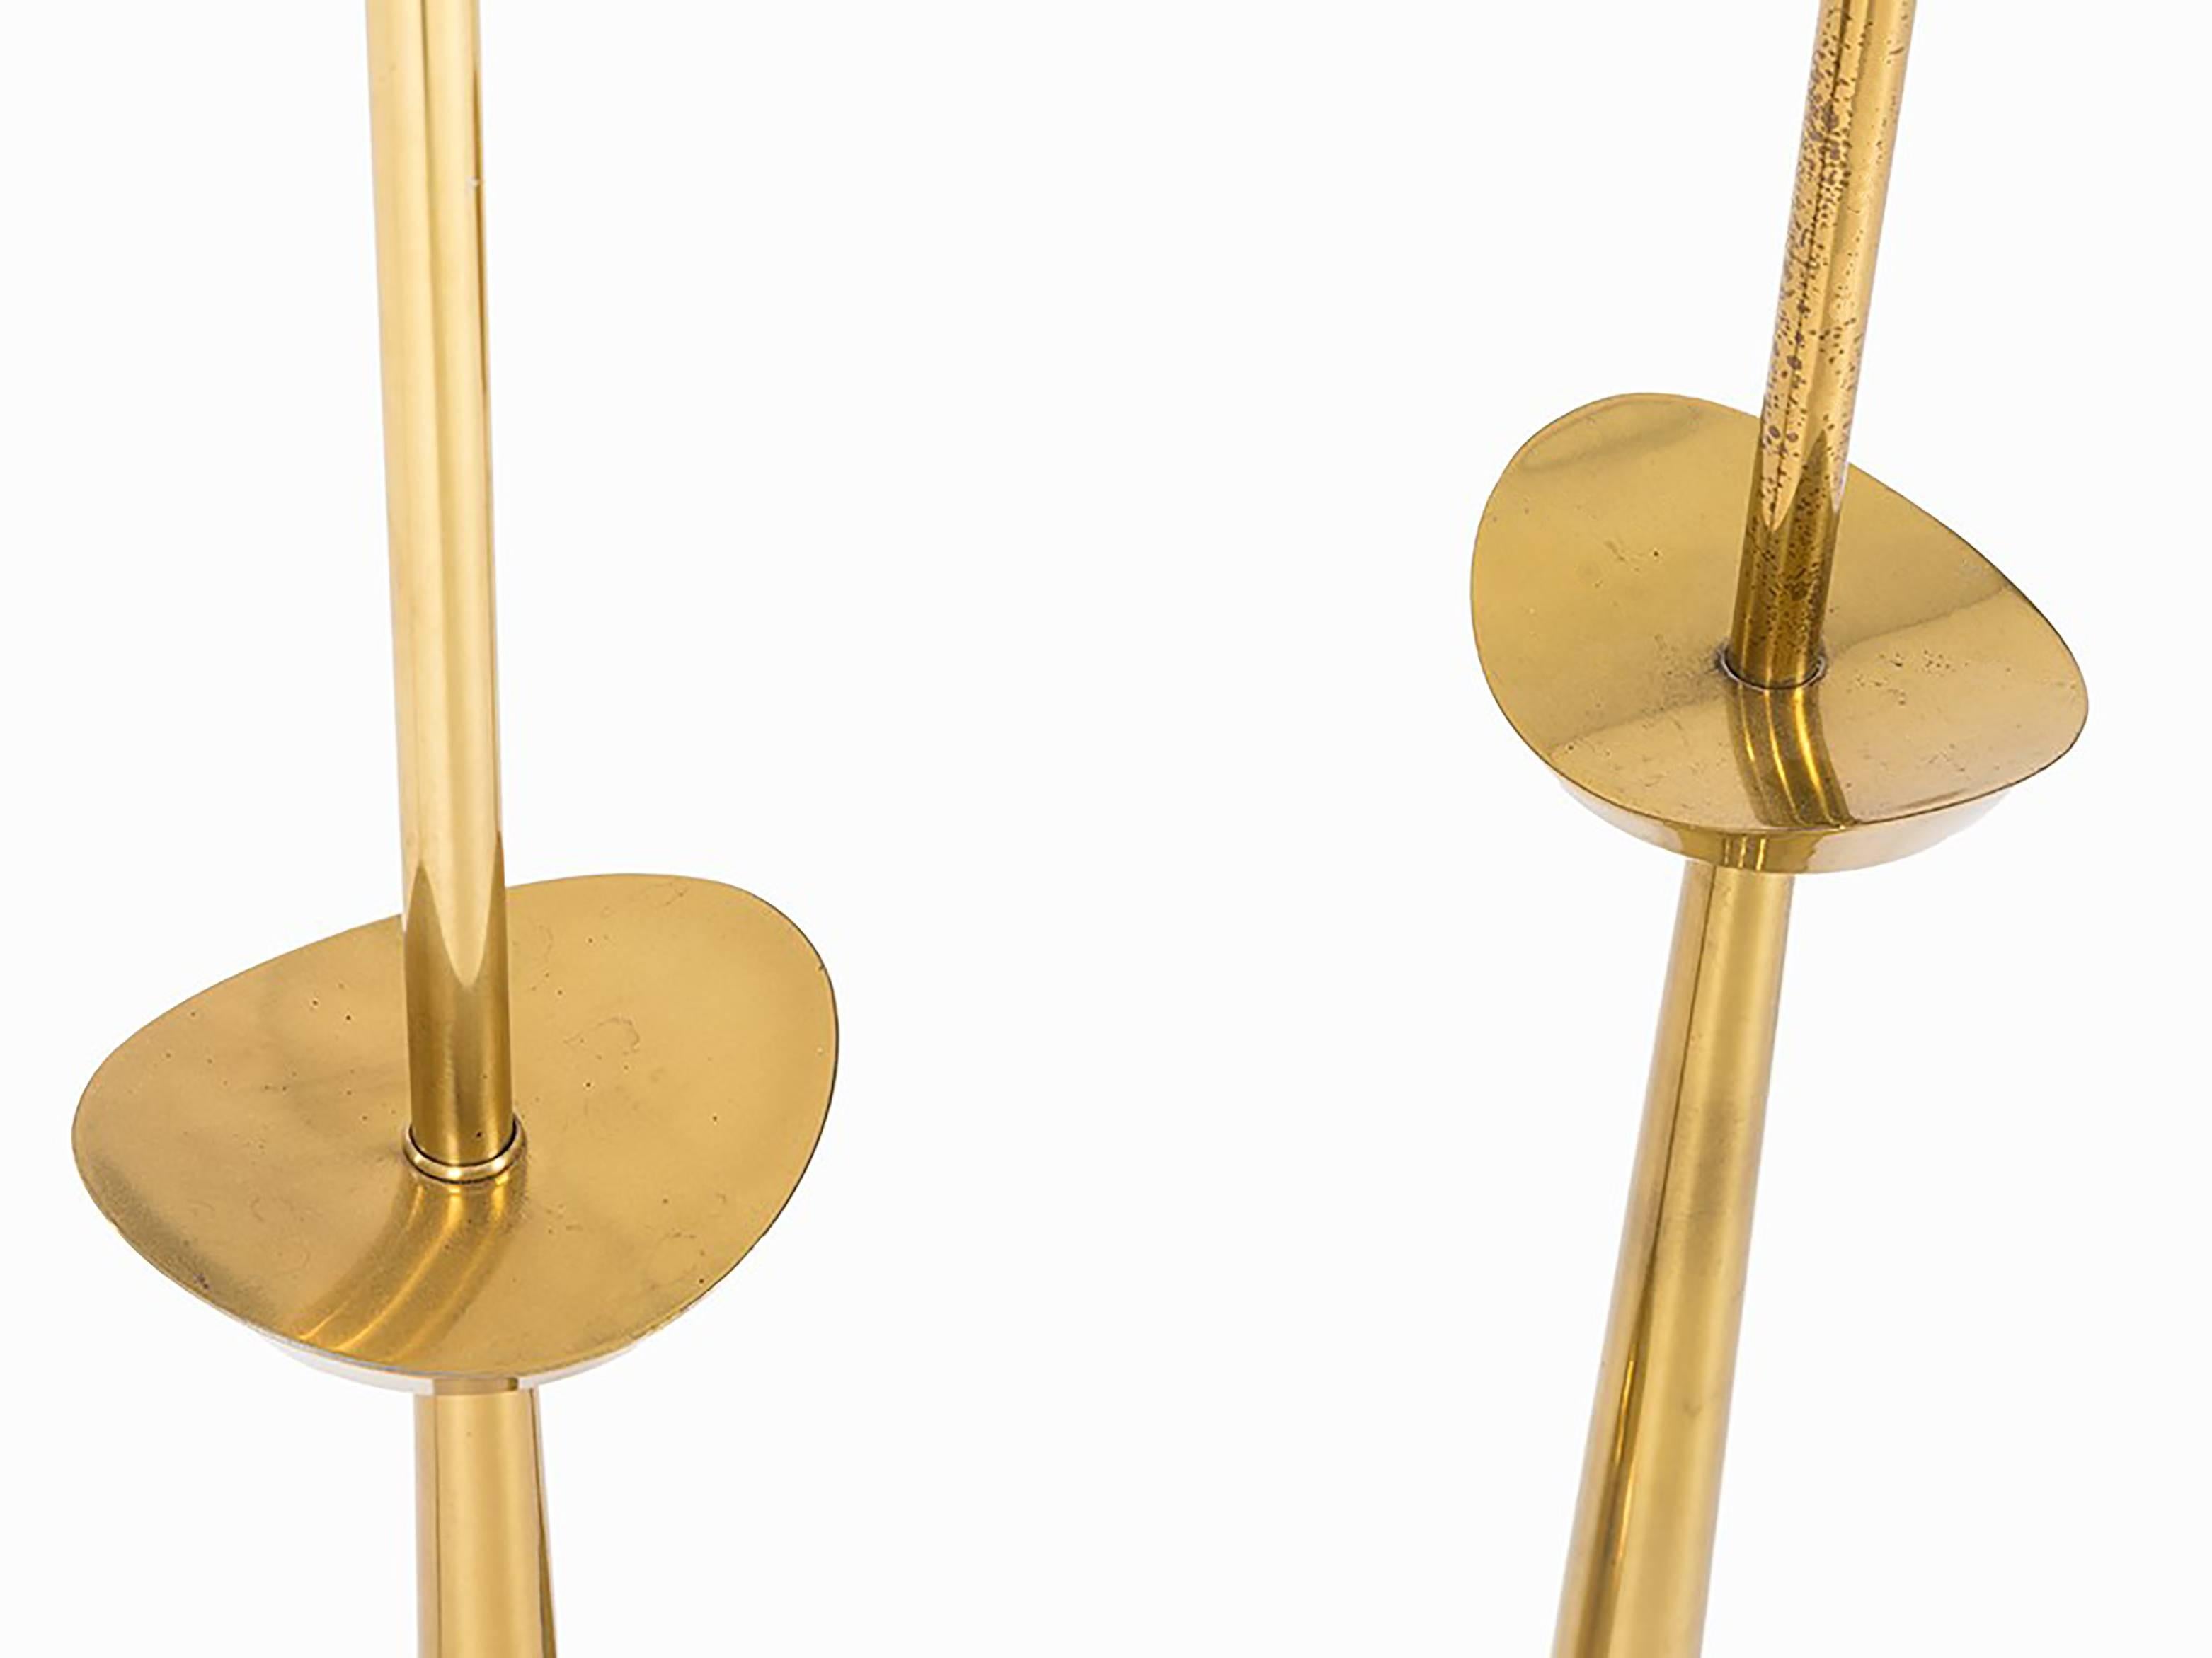 A pair of tall brass lamps with carved star details by Tommi Parzinger (1903-1981) for Stiffel, USA, 1960s.
The lampshades are in off-white cotton and linen.
